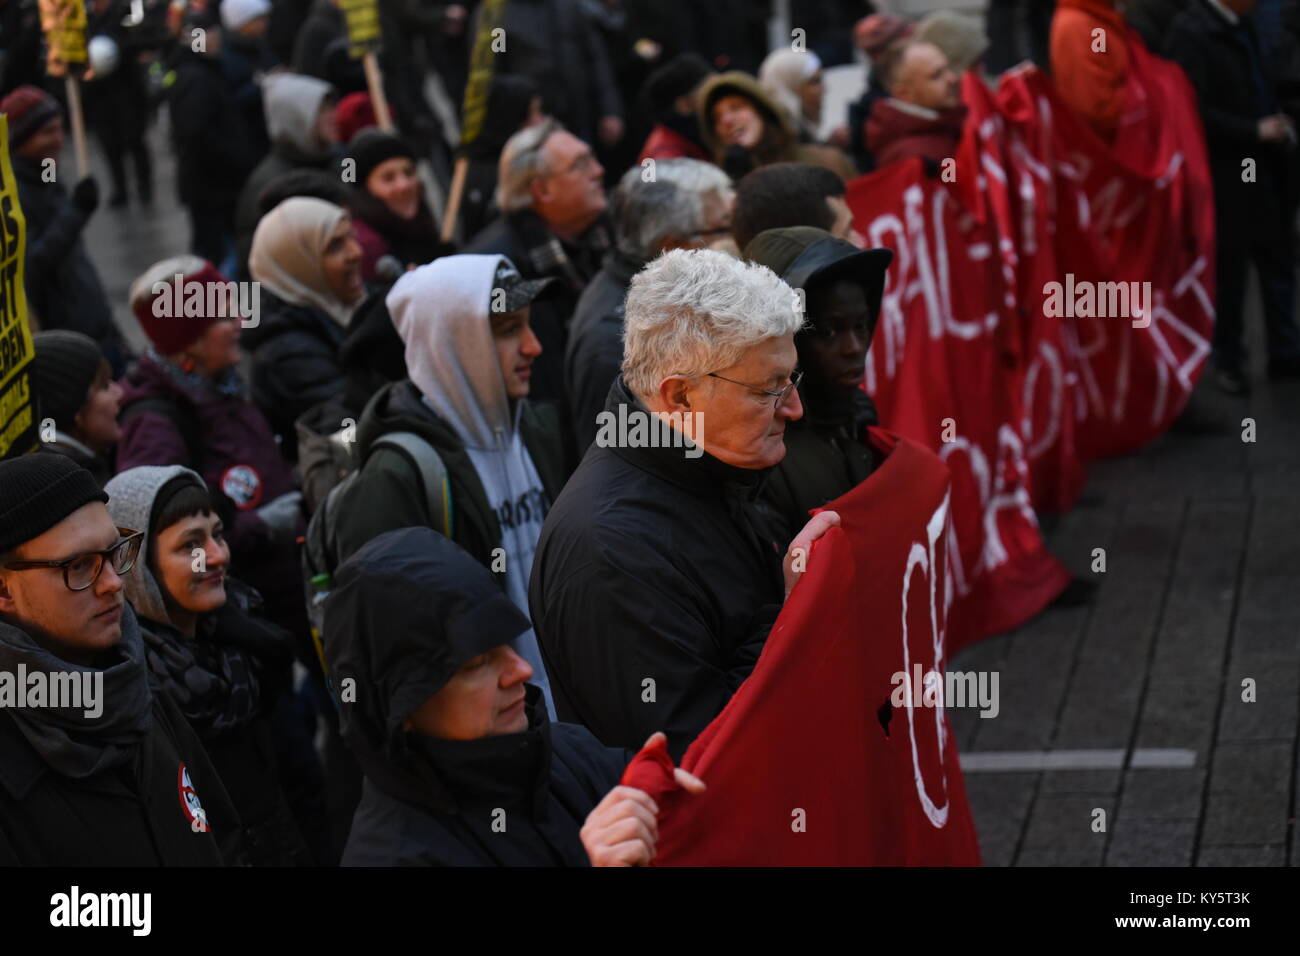 Vienna, Austria. 13th Jan, 2018. protesters carrying a banner through Vienna's main shopping street during an anti-government demonstration. Credit: Vincent Sufiyan/Alamy Live News Stock Photo